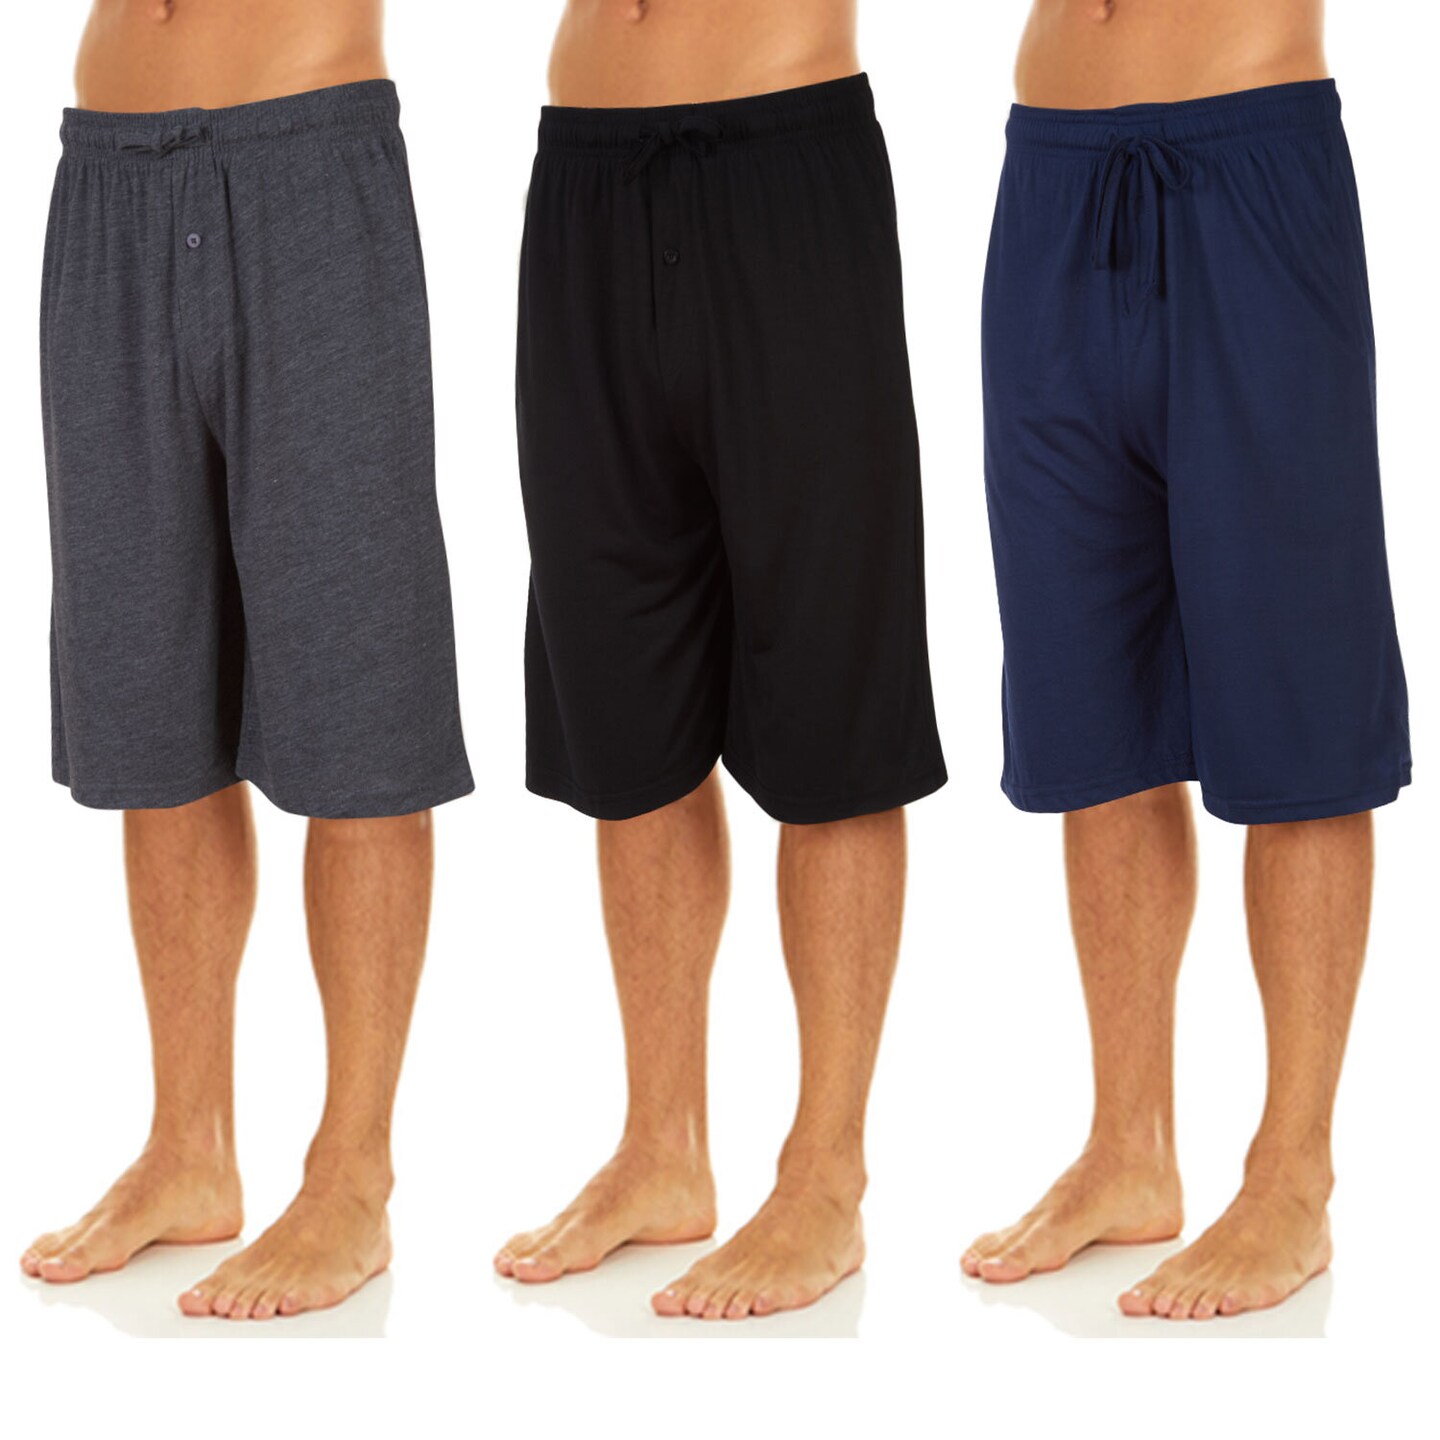 Men's Cotton Pajama Bottoms Soft Lounge Shorts with Pockets